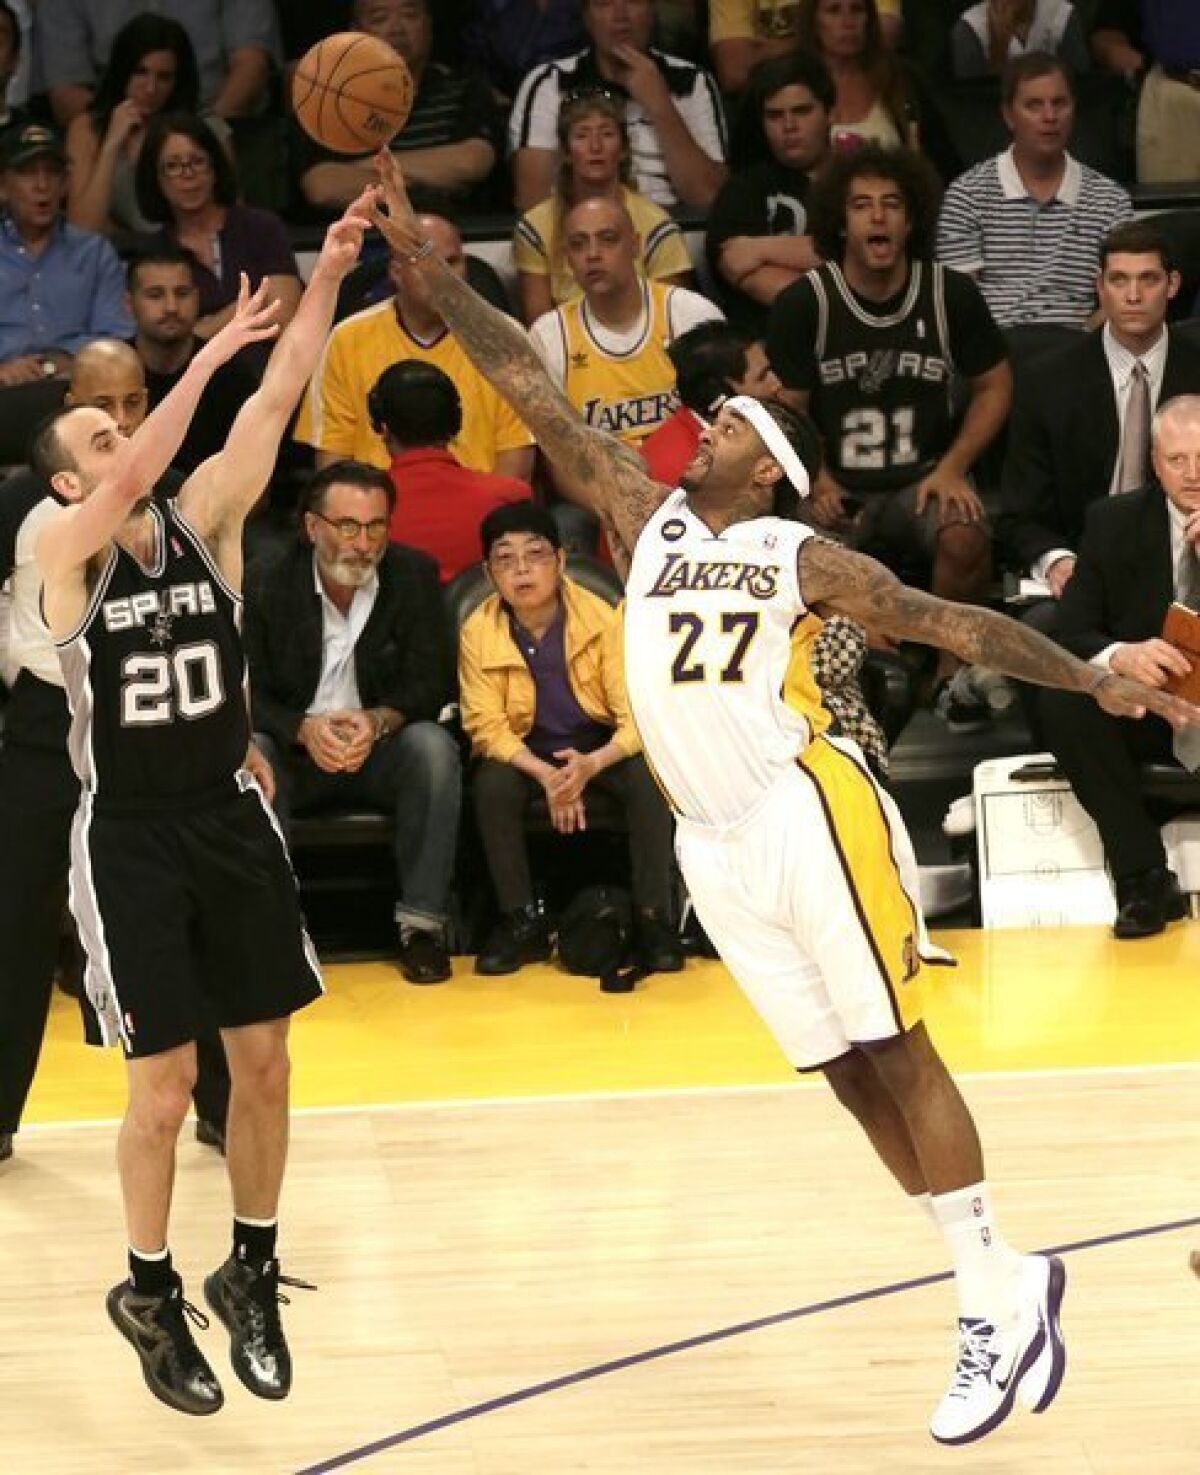 Lakers center Jordan Hill blocks a shot by Spurs guard Manu Ginobili in the second half of Game 4 on Sunday at Staples Center.